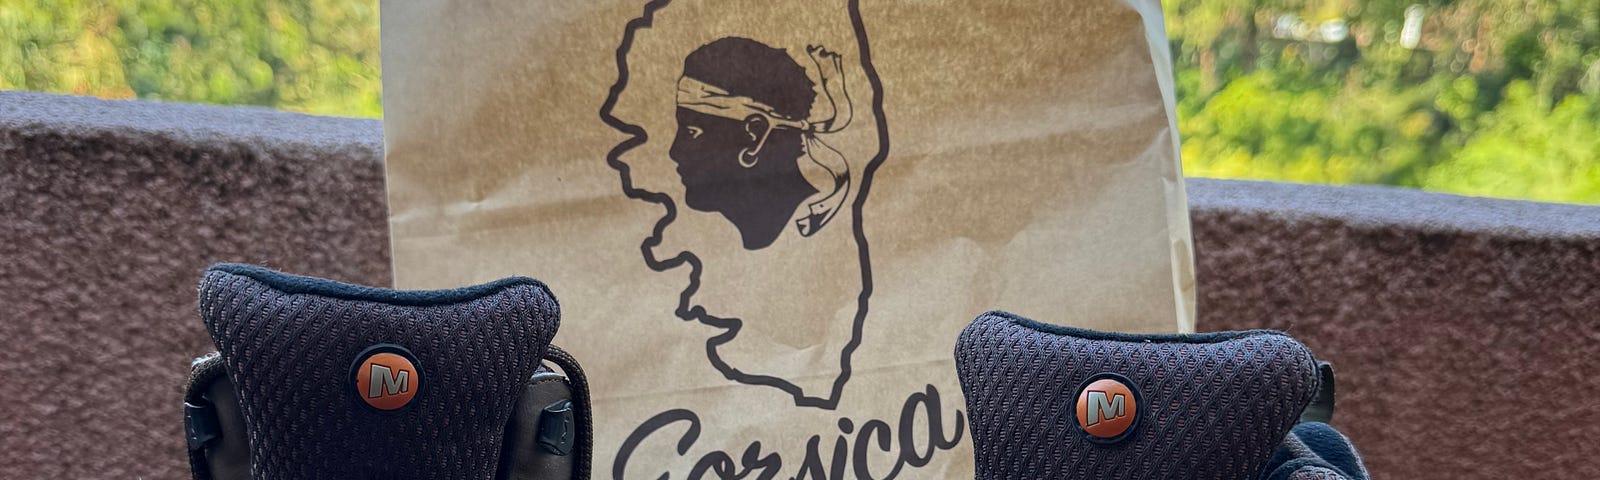 Hiking boots against shopping bag with Corsica logo